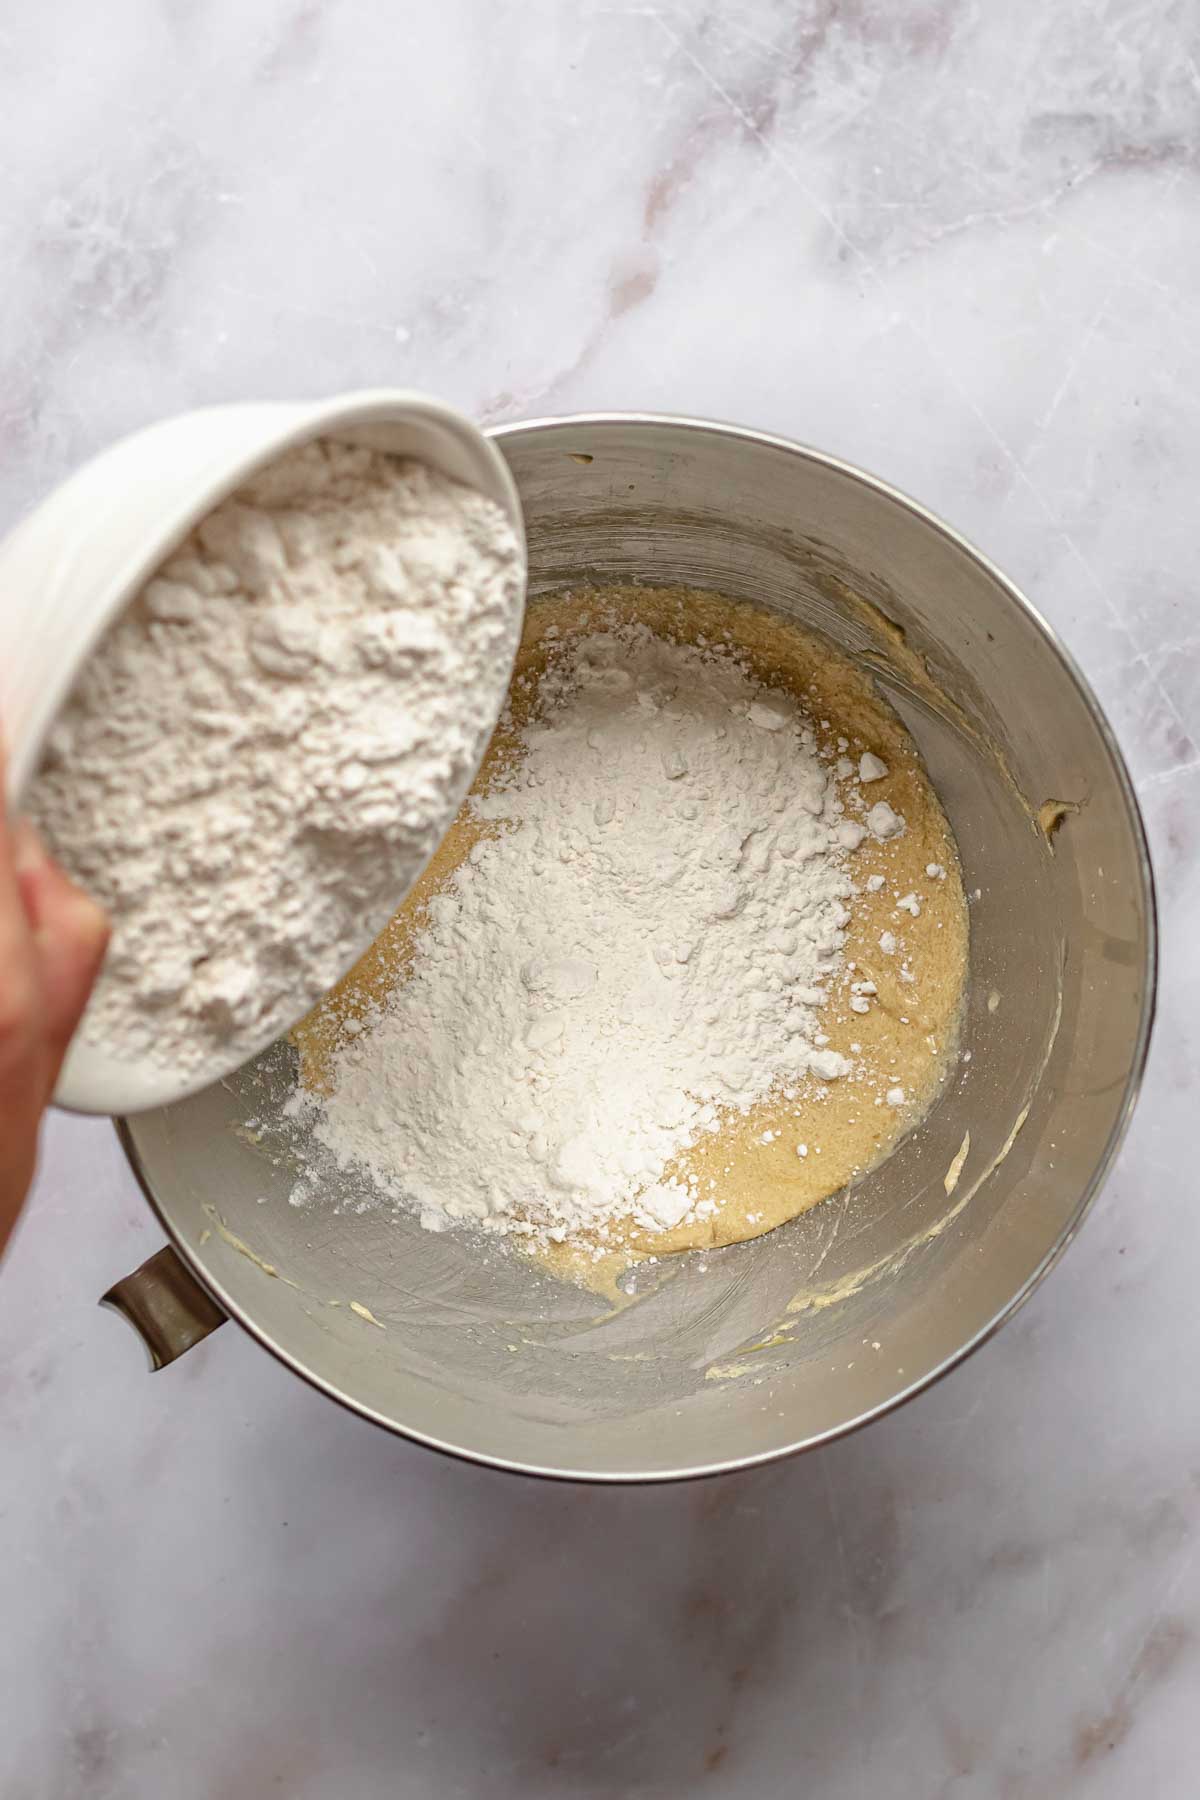 A hand pours a bowl of dry ingredients into wet ingredients.